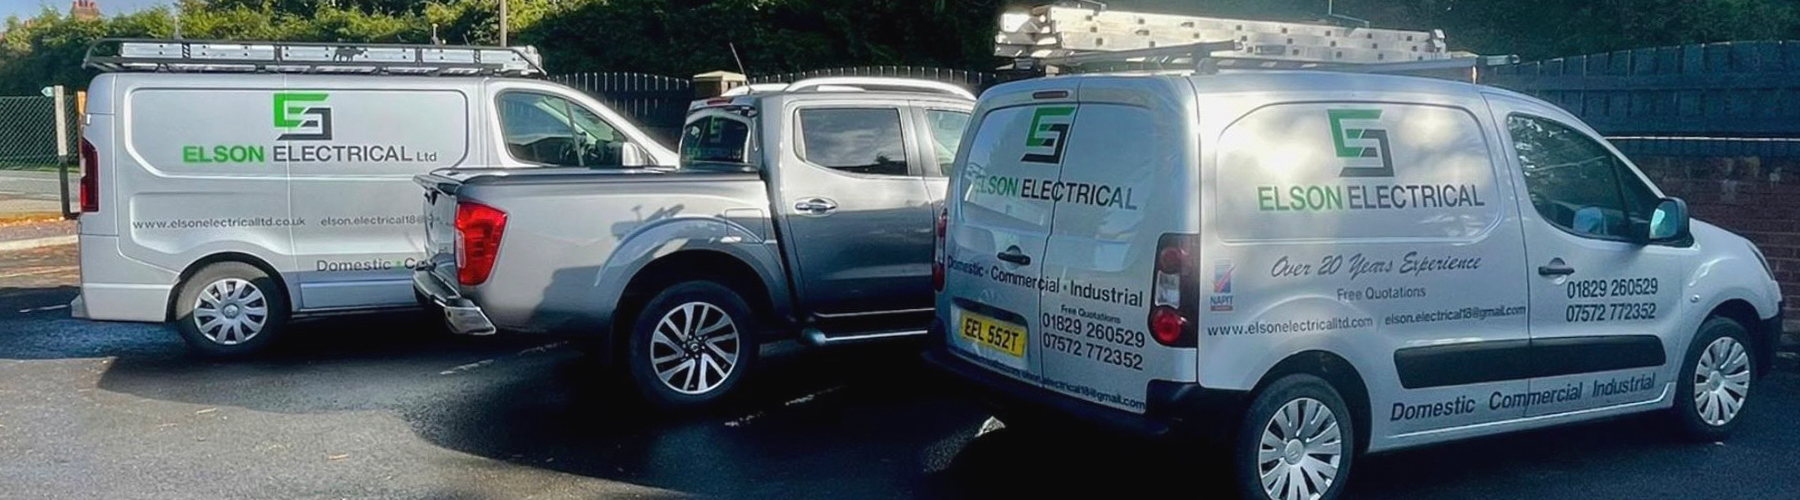 Elson Electrical Ltd - Full electrical installations - Image